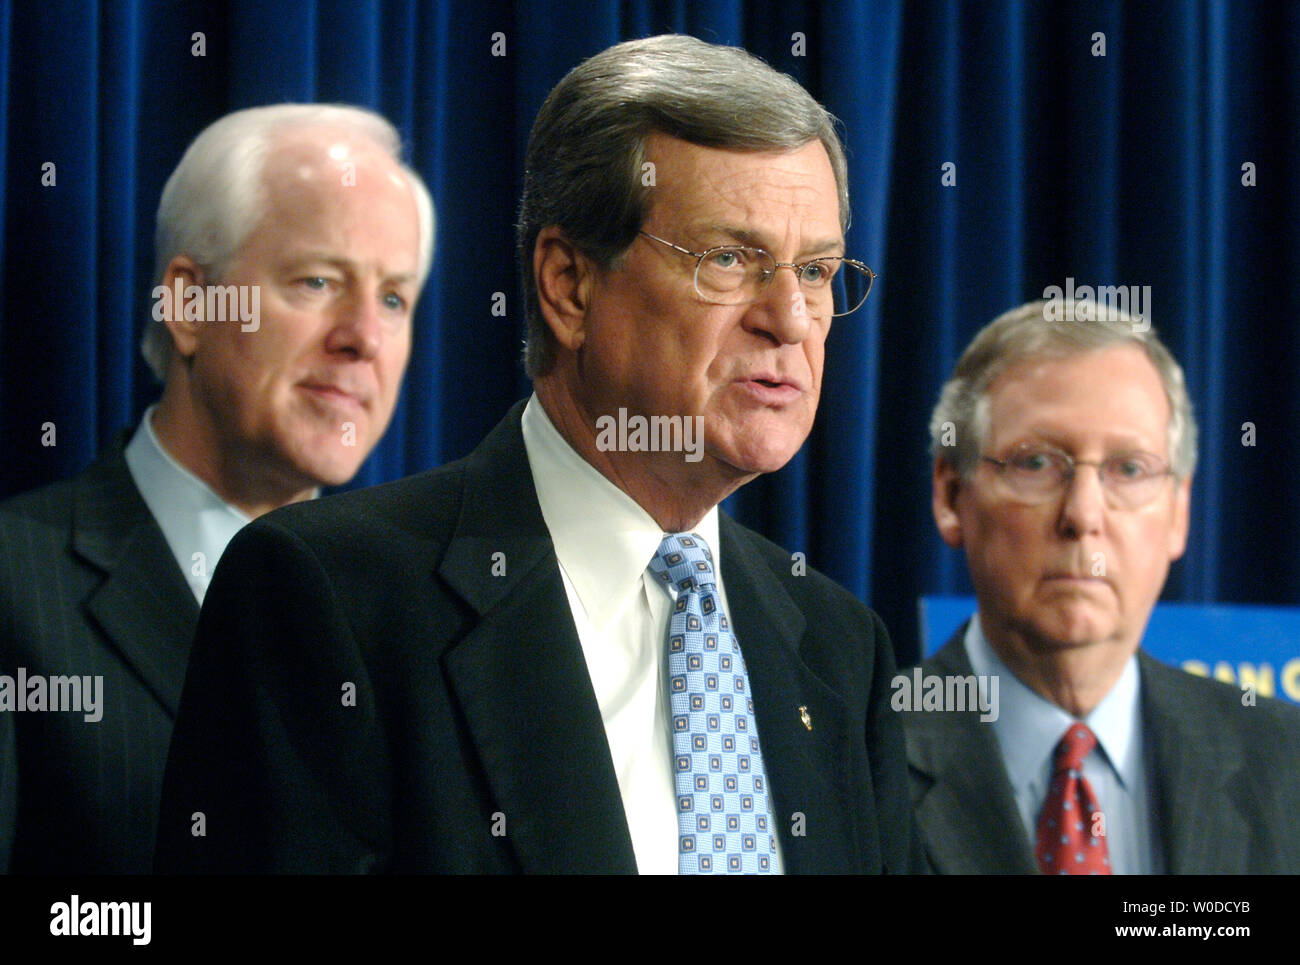 Assistant Minority Leader Trent Lott (R-MS) (C) speaks about the Senate GOP Agenda for the 110th Congress, in Washington on February 15, 2007. Lott was joined by Sen. John Cornyn (R-TX) (L) and John Kyl (R-AZ). (UPI Photo/Kevin Dietsch) Stock Photo